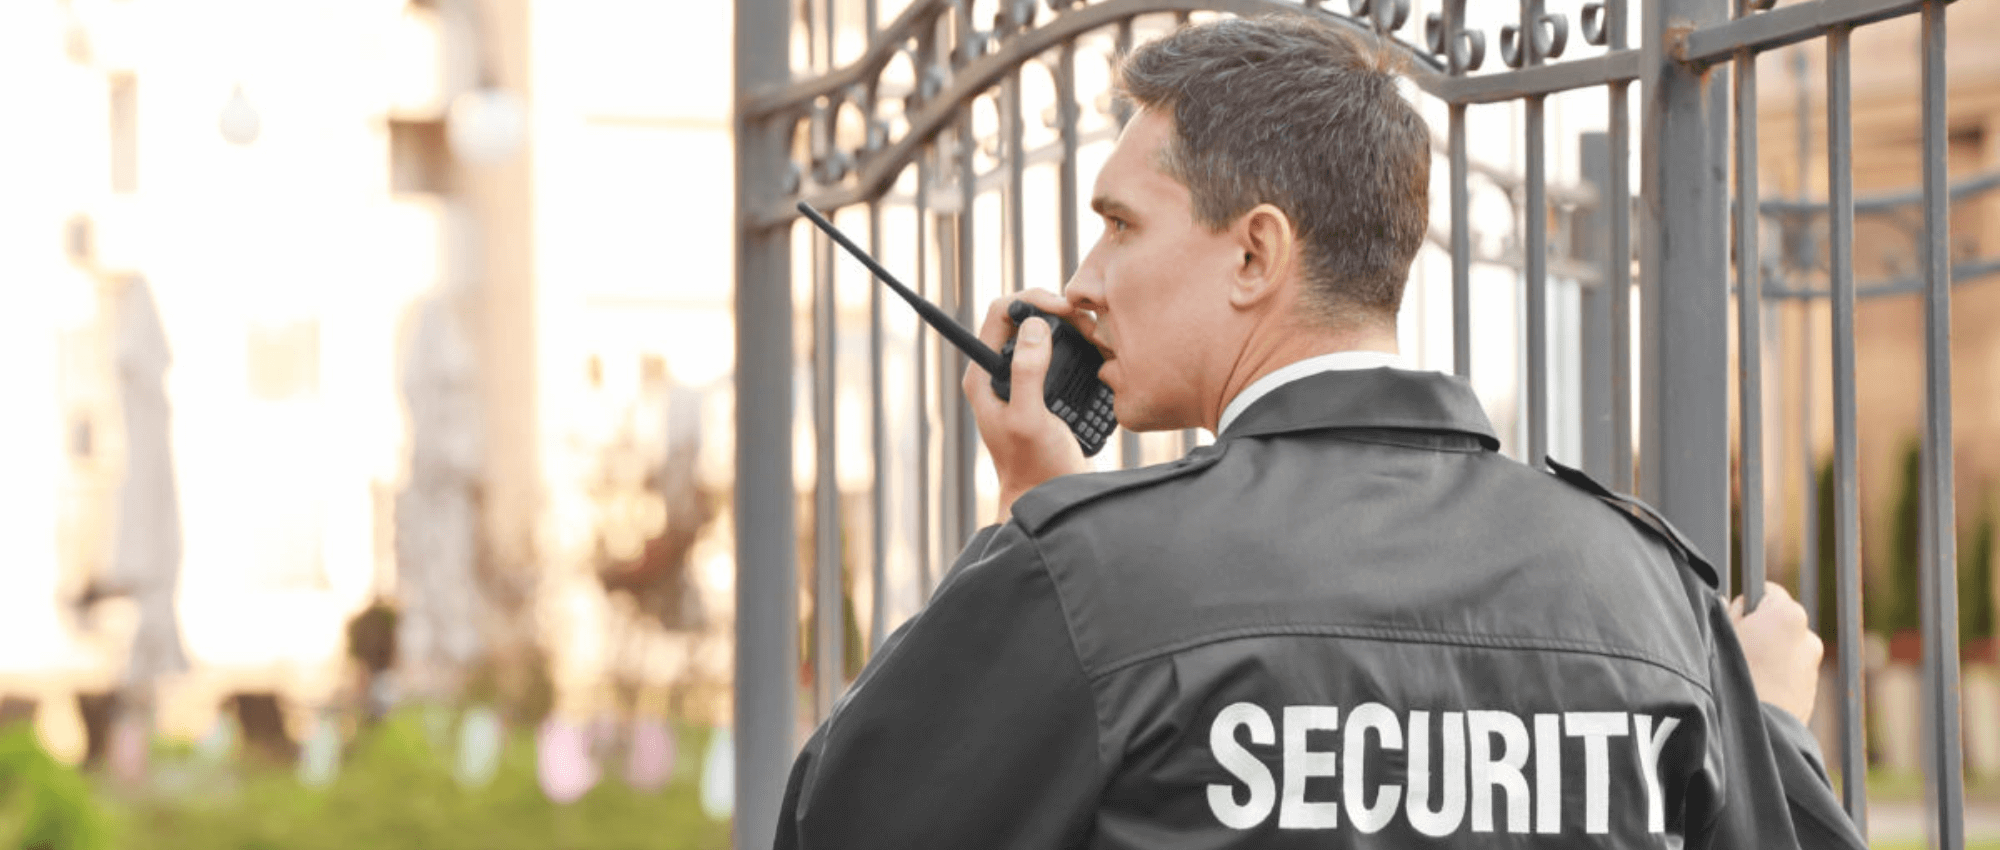 MLZ security services hiring event